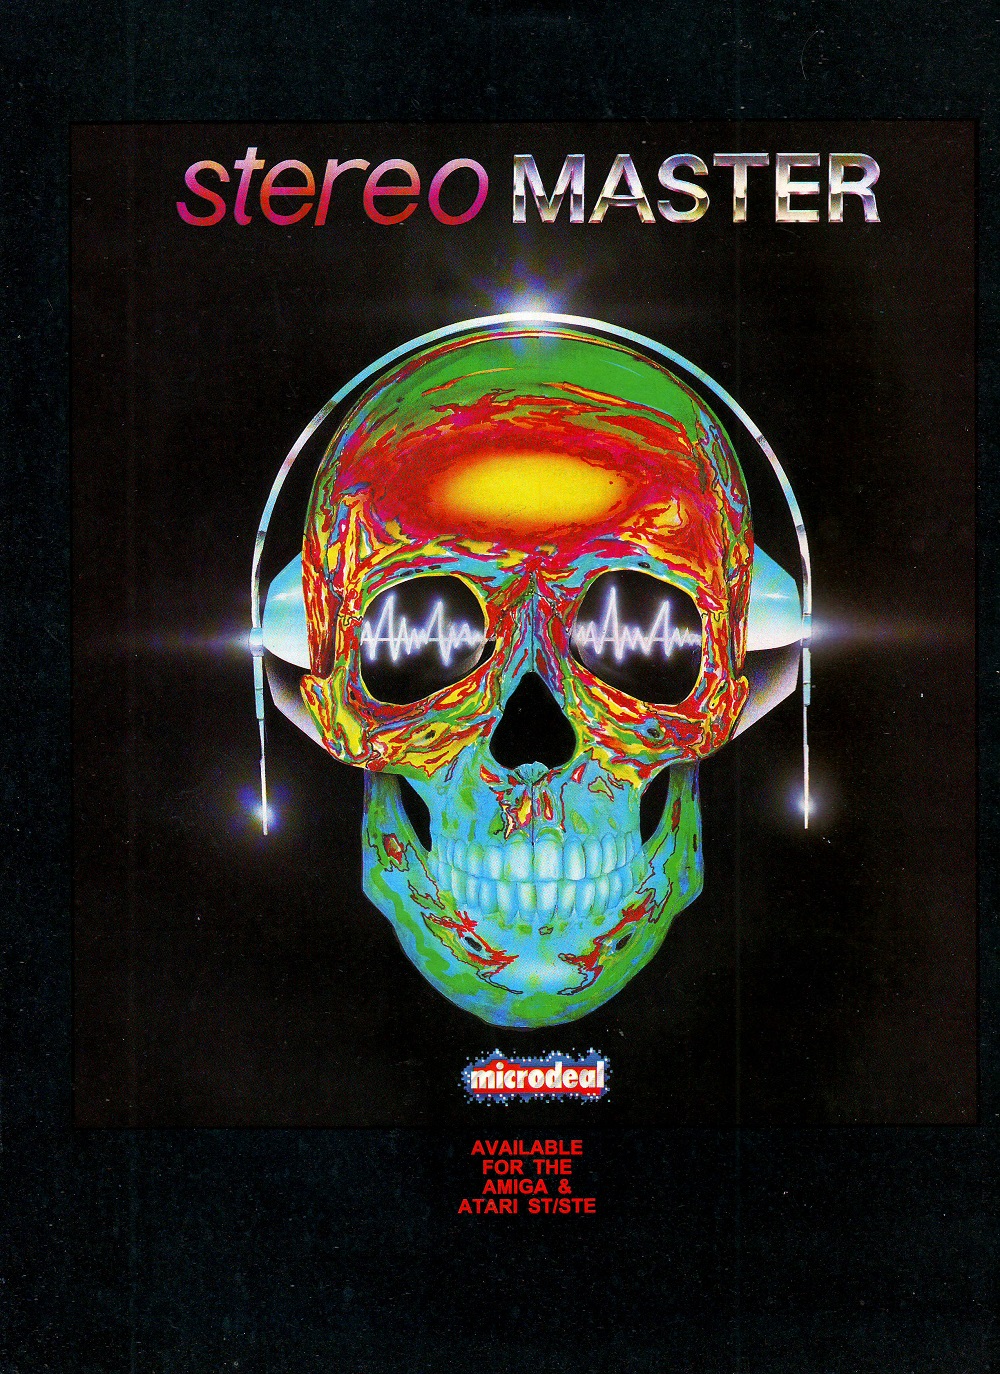 The Masters of the Stereo